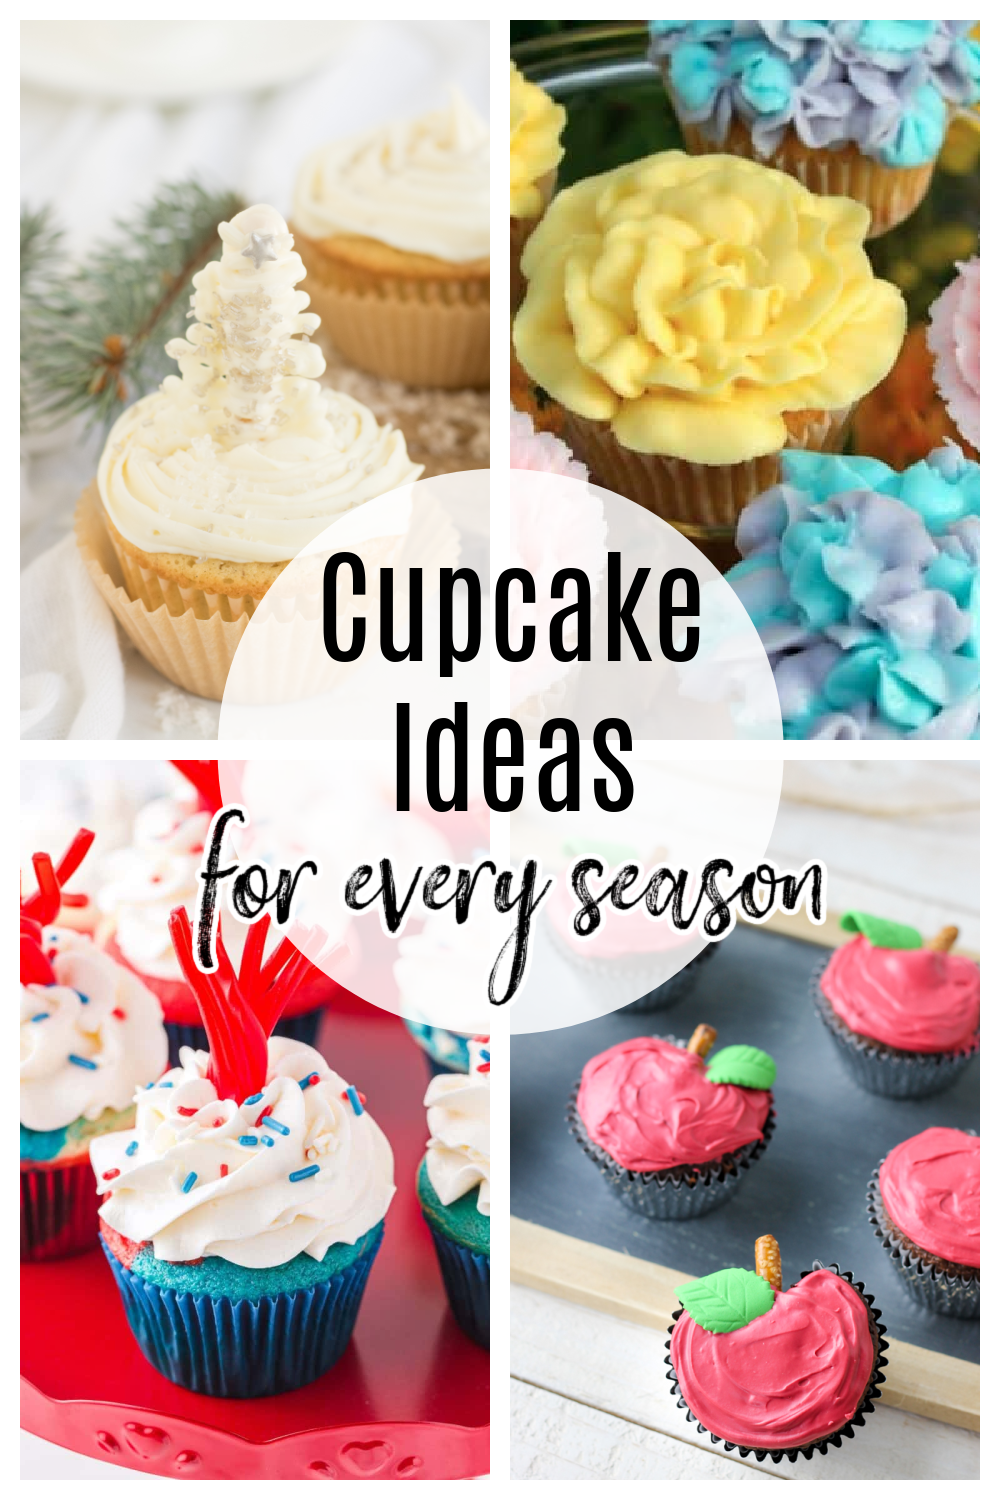 Celebrate every season of the year with these easy cupcake ideas. This cupcake collection includes recipes for every major (and some not-so-major) holiday and season from January to December! via @nmburk